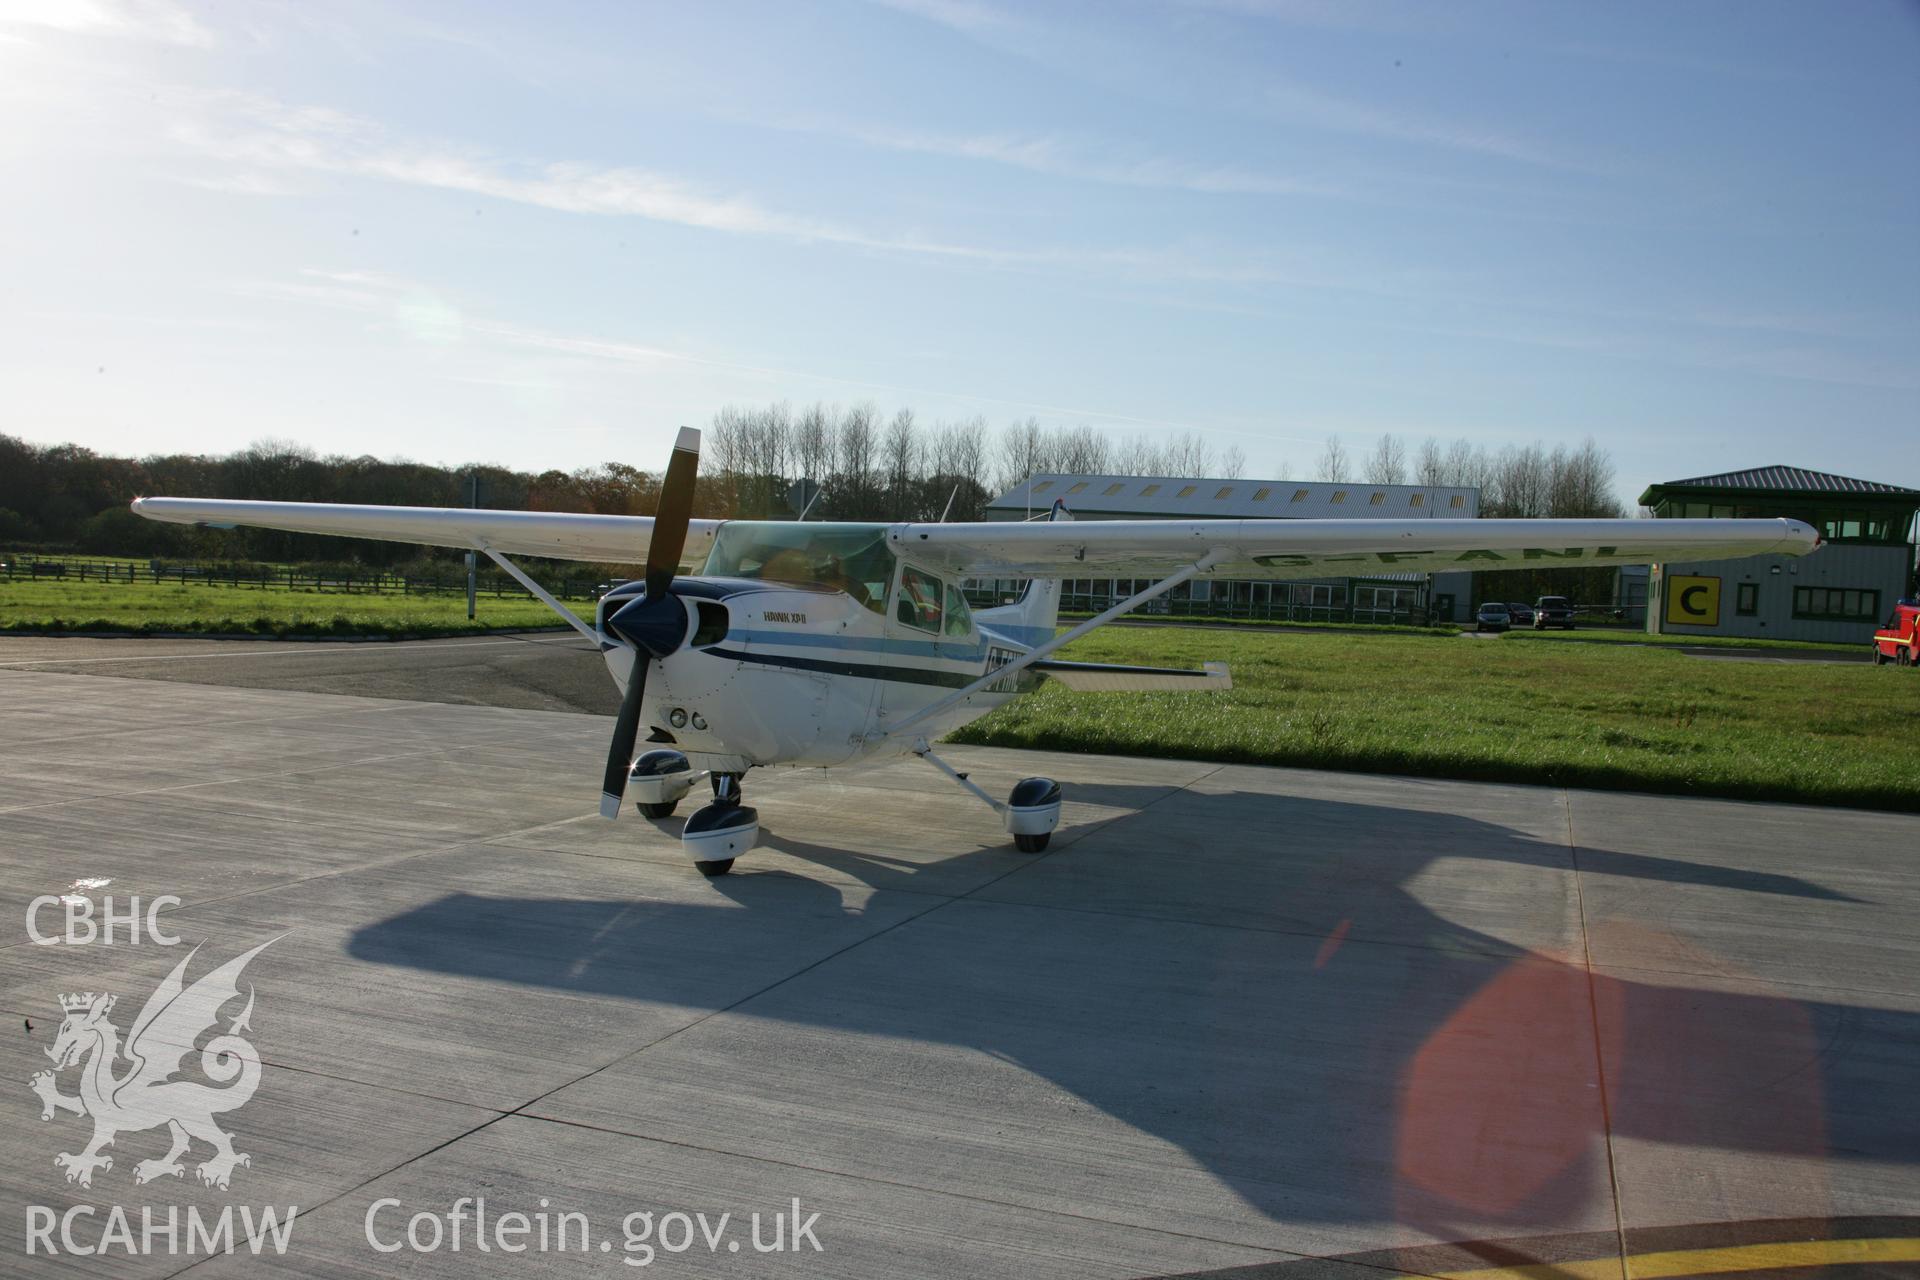 RCAHMW colour photograph of Cessna 172, used for reconnaissance, pictured on apron to east of main buildings, at Haverfordwest Airfield (Withybush). Taken on 19 November 2005 by Toby Driver